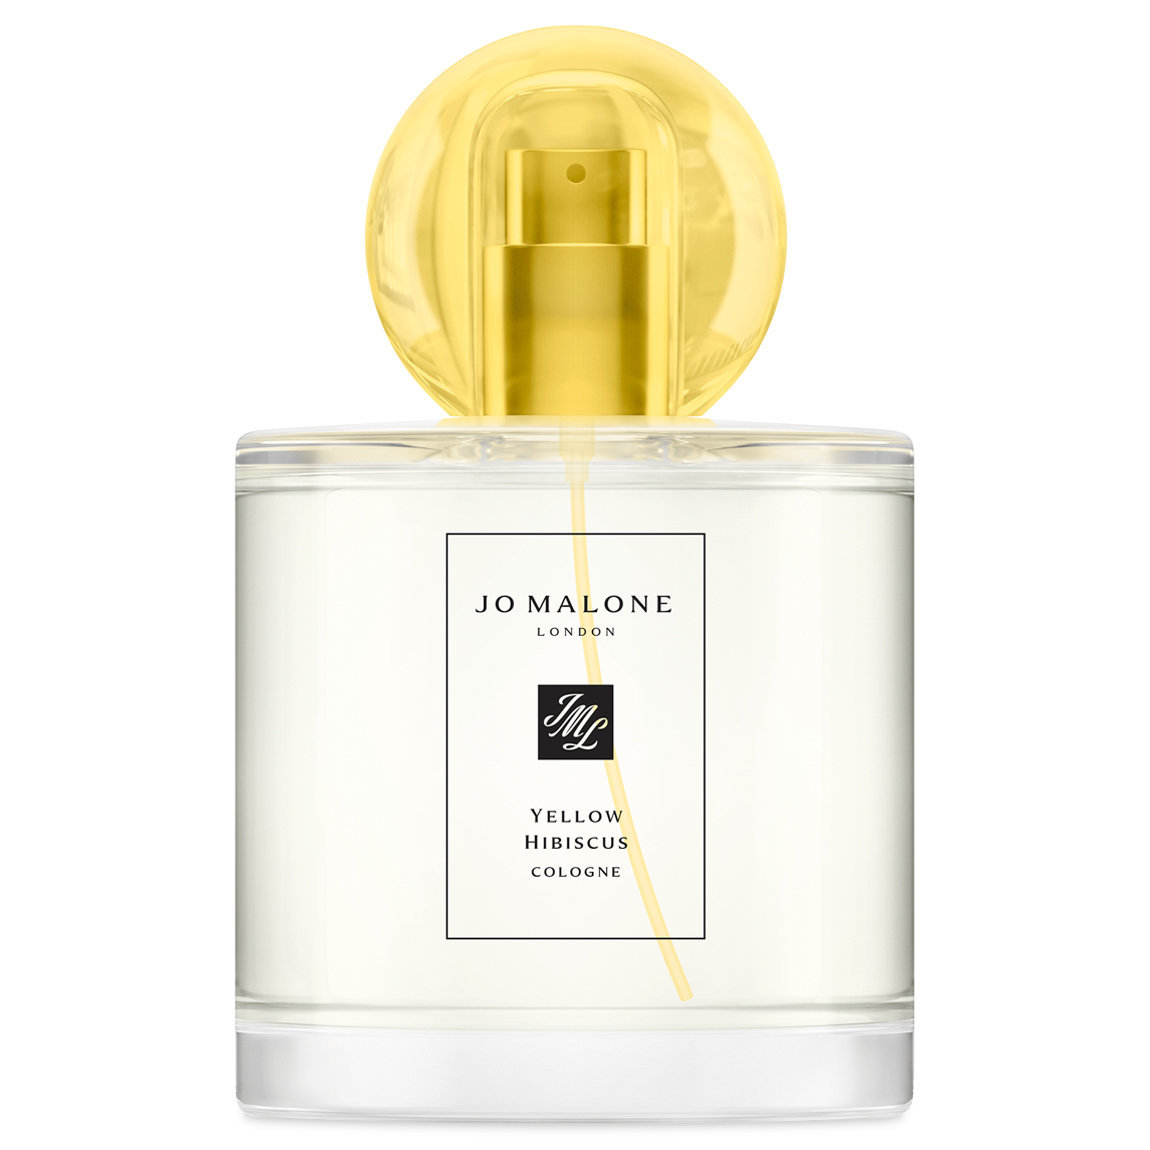 Jo Malone London Yellow Hibiscus Cologne 100 ml alternative view 1 - product swatch.